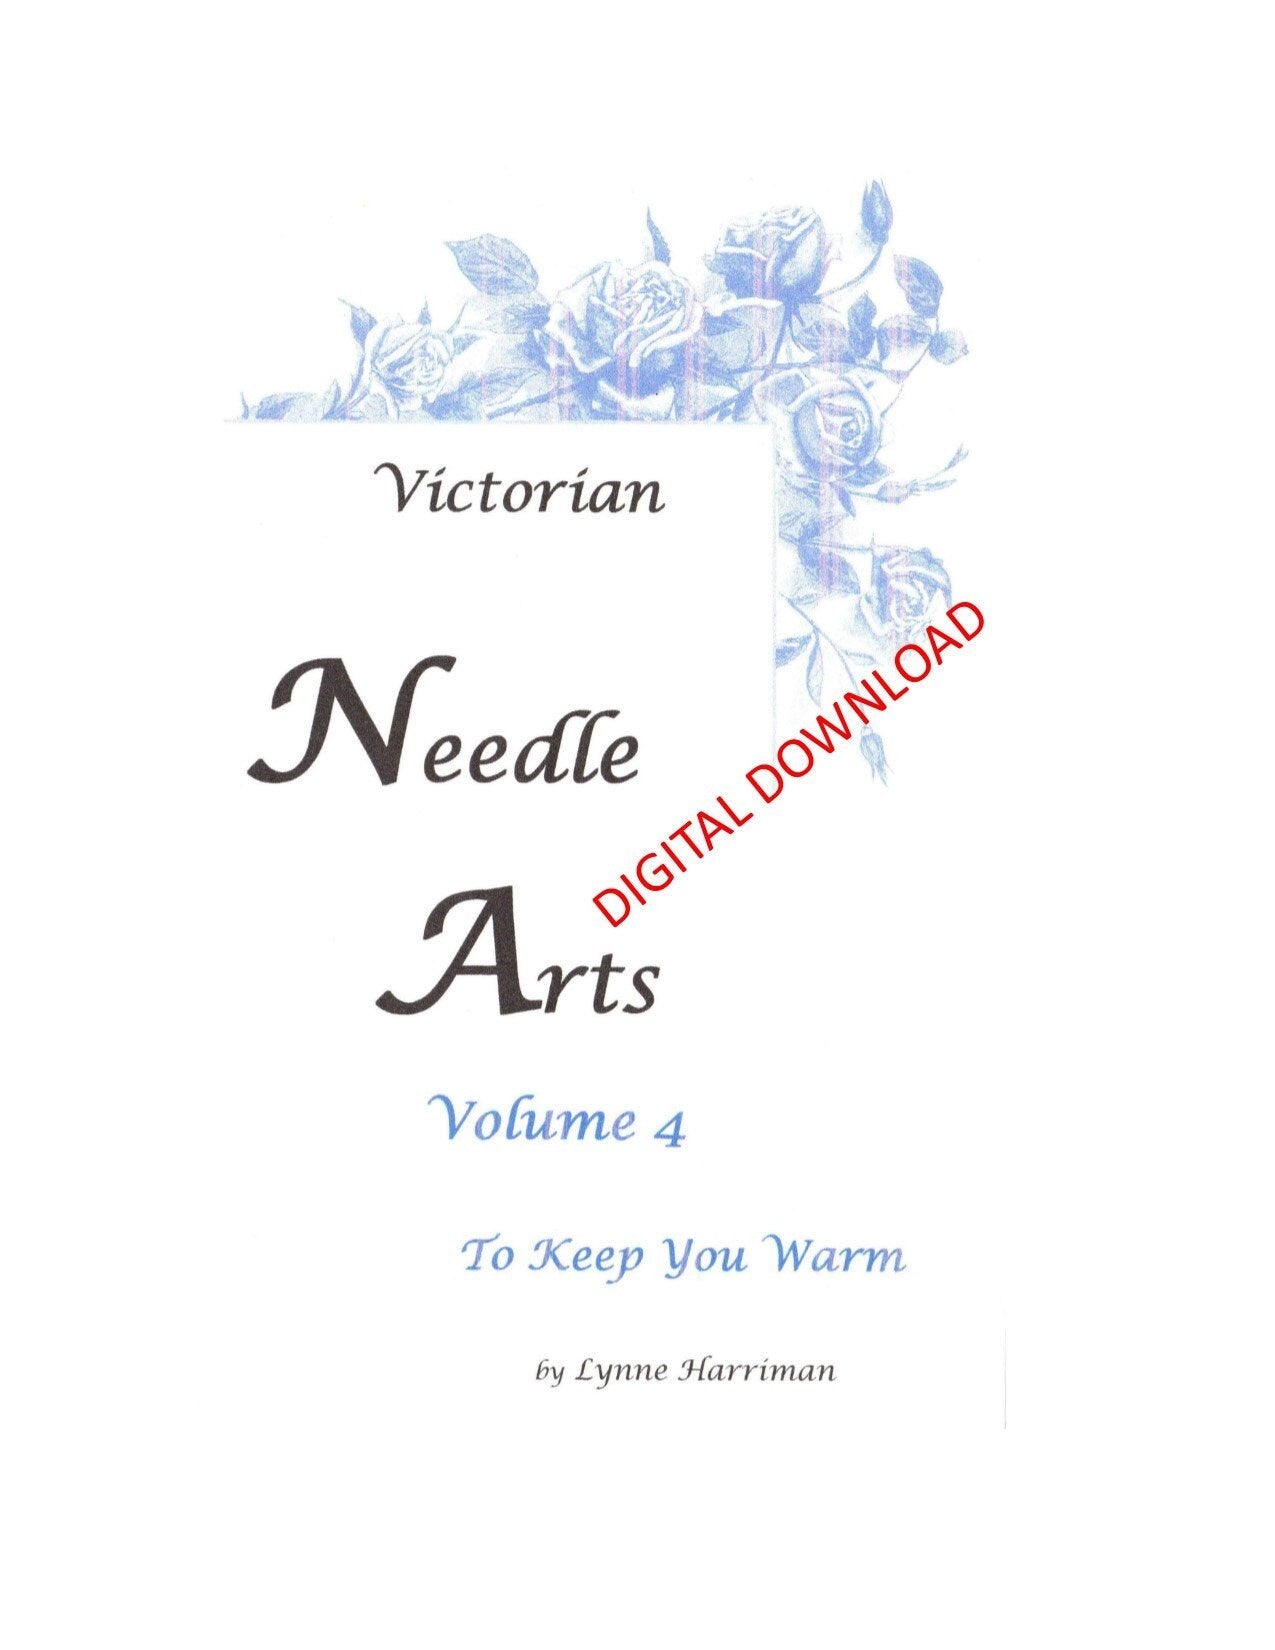 Needle Arts Volume 4 - To Keep You Warm - Crochet and Knit Pattern Booklet DIGITAL DOWNLOAD